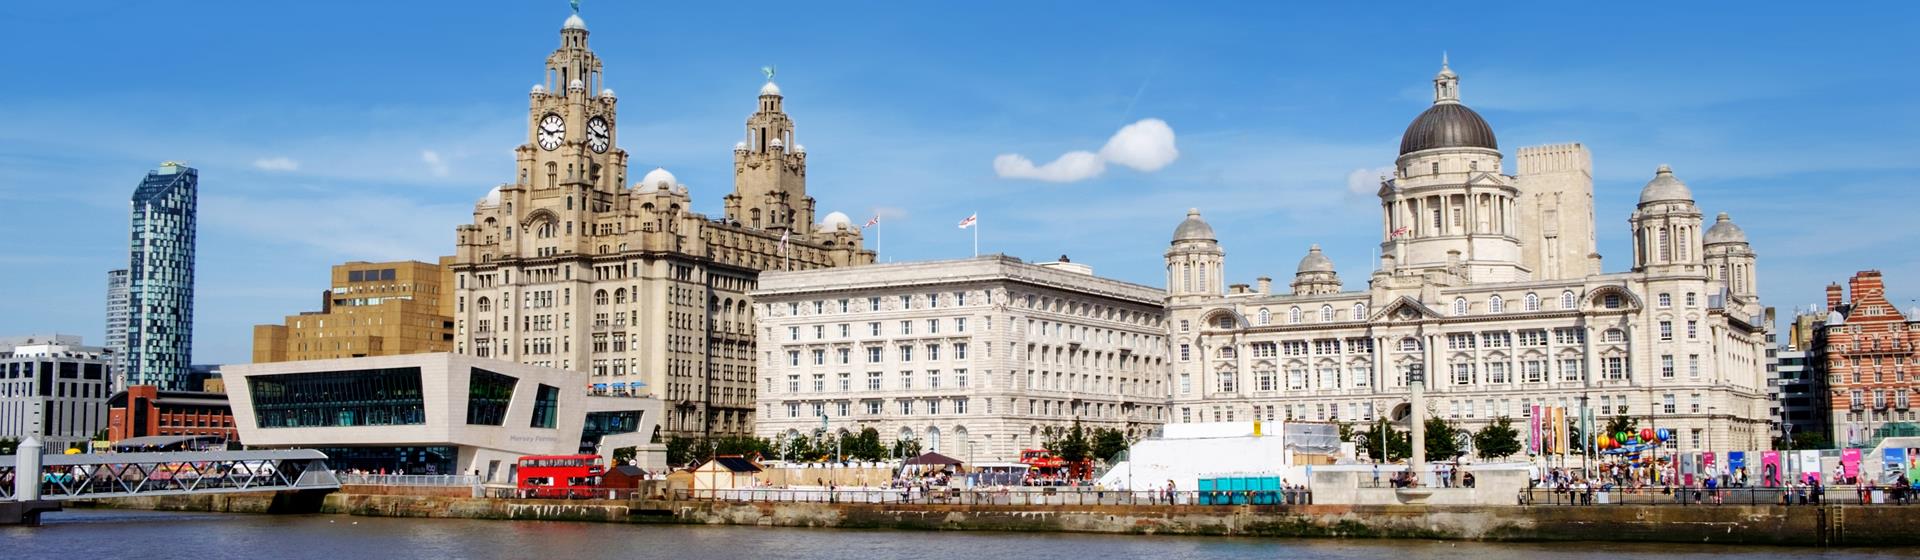 Holidays & City Breaks to Liverpool